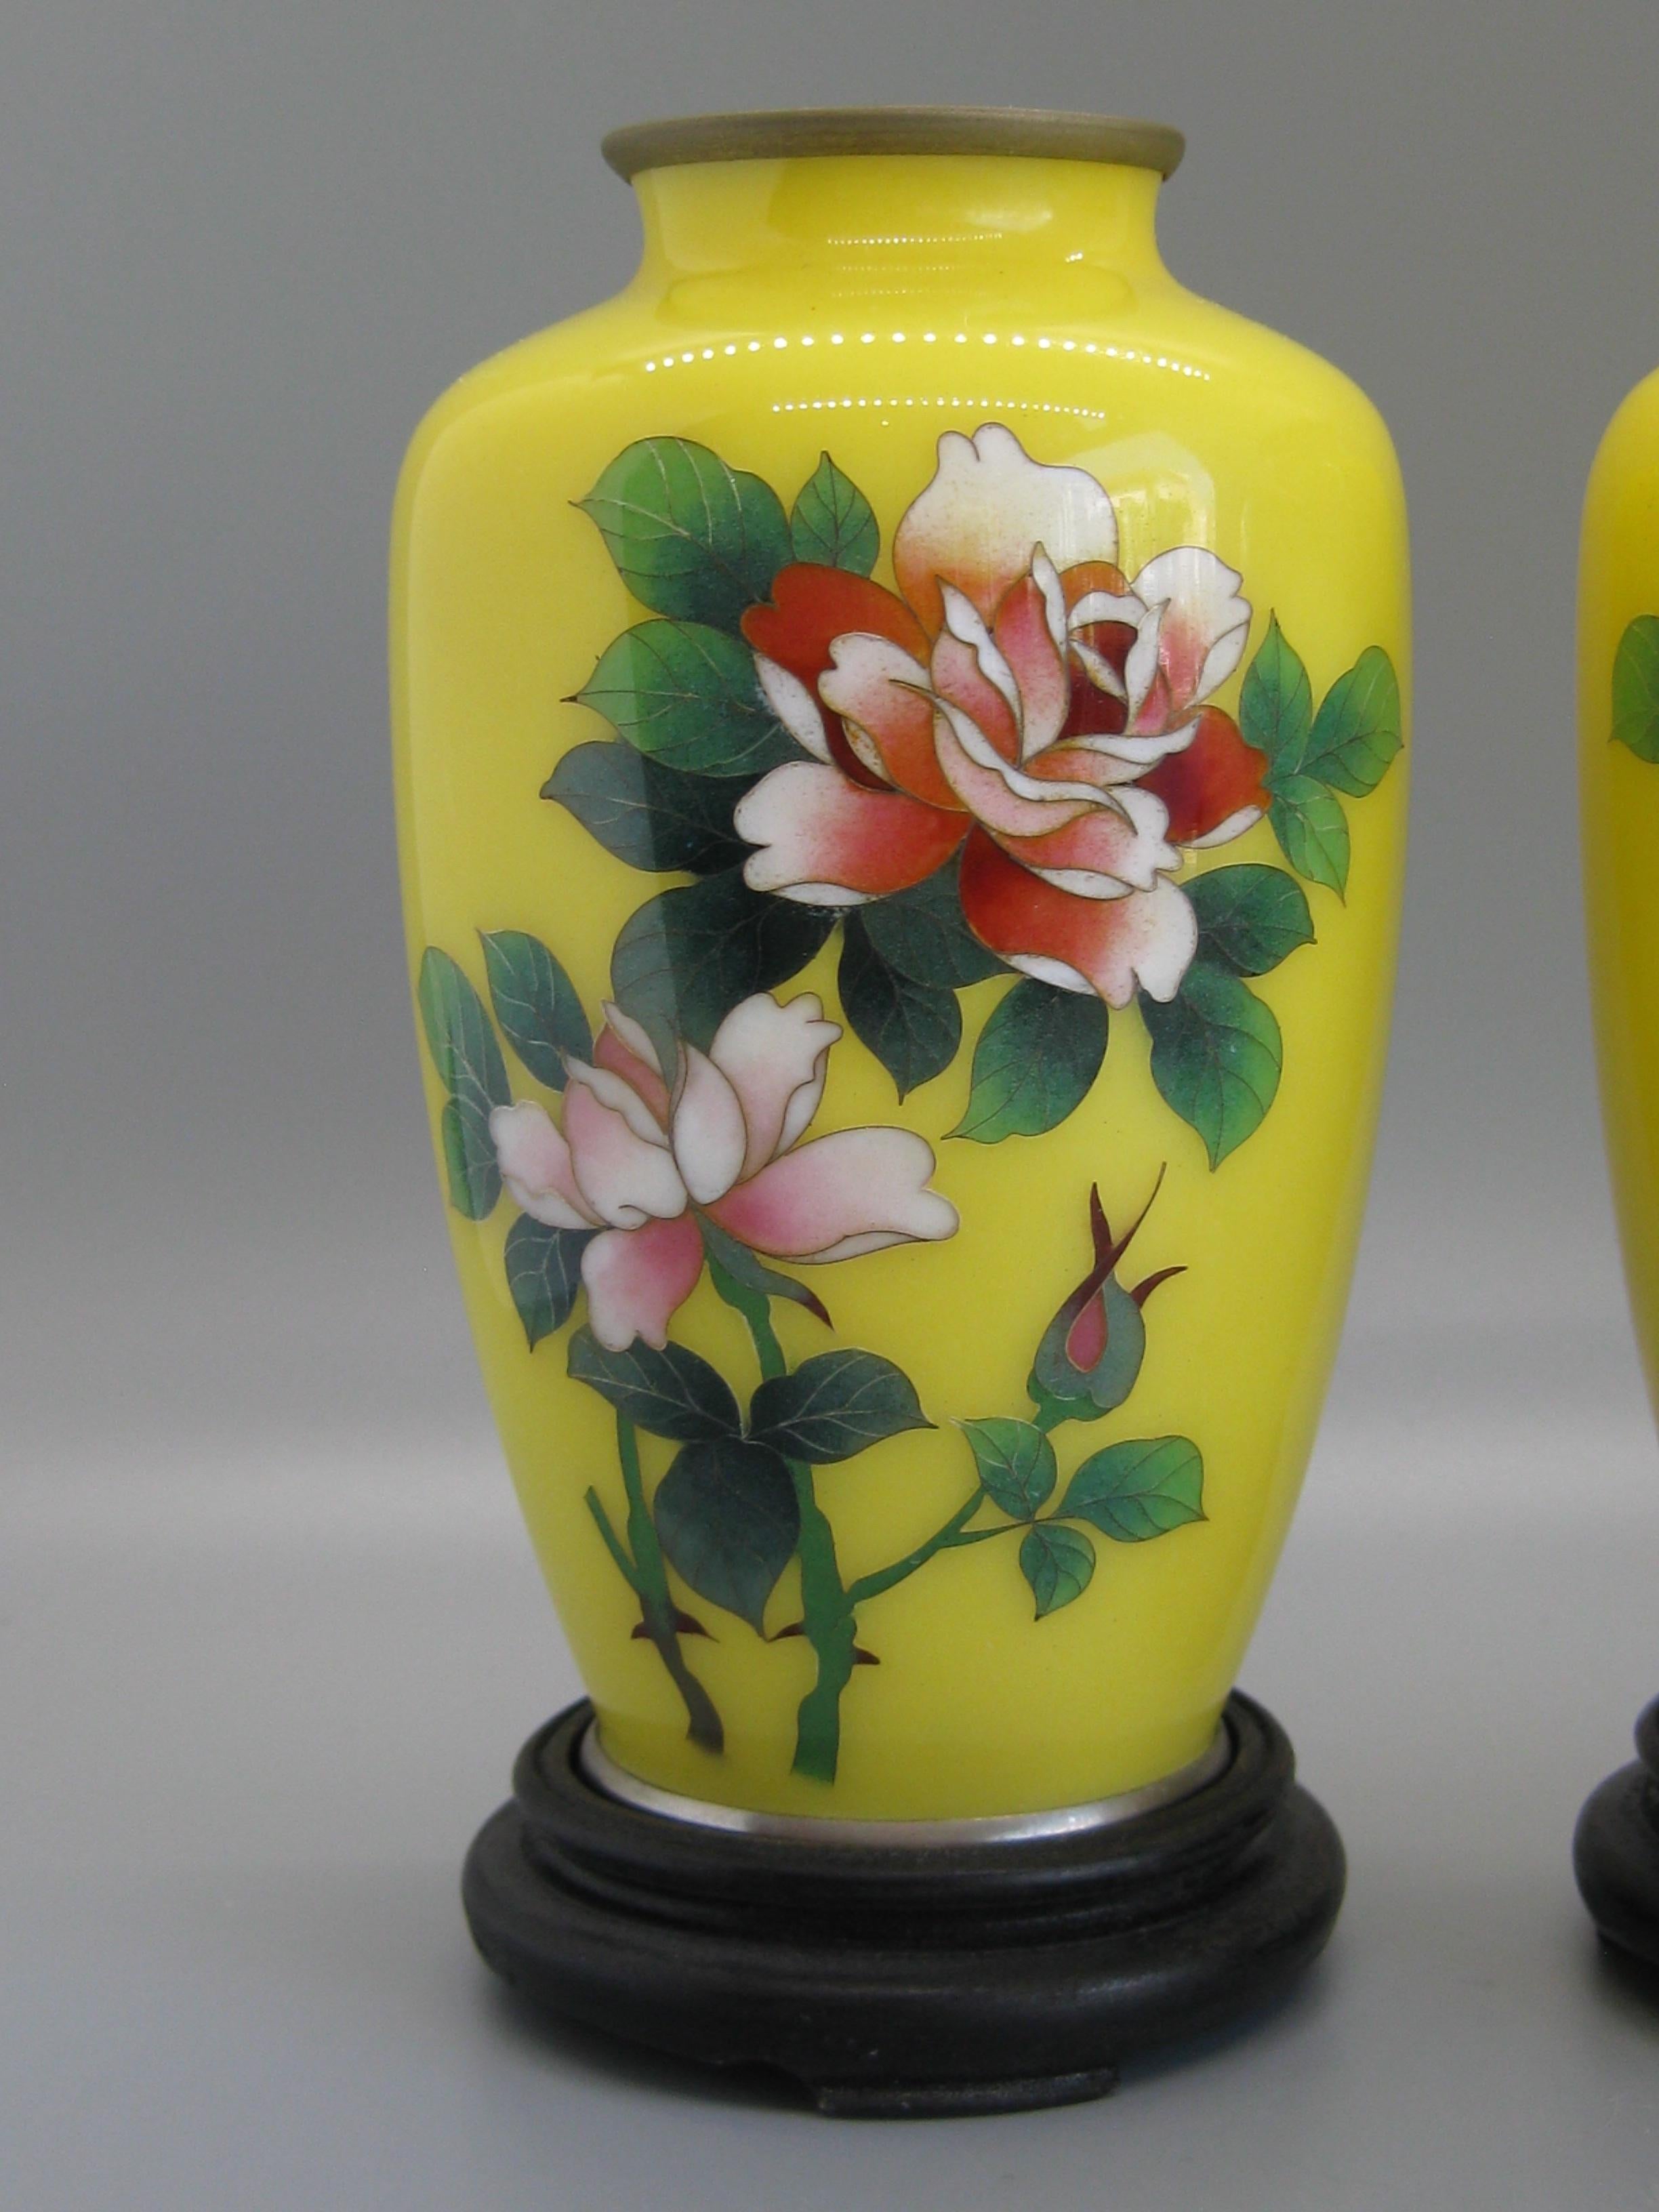 Fine pair of antique Japanese cloisonné enamel vases dating from the early 1900s. The both are marked by the artist on the bottom. These are attributed to master artist Ando Jubei. Beautiful colorful roses with a yellow background. The come with the